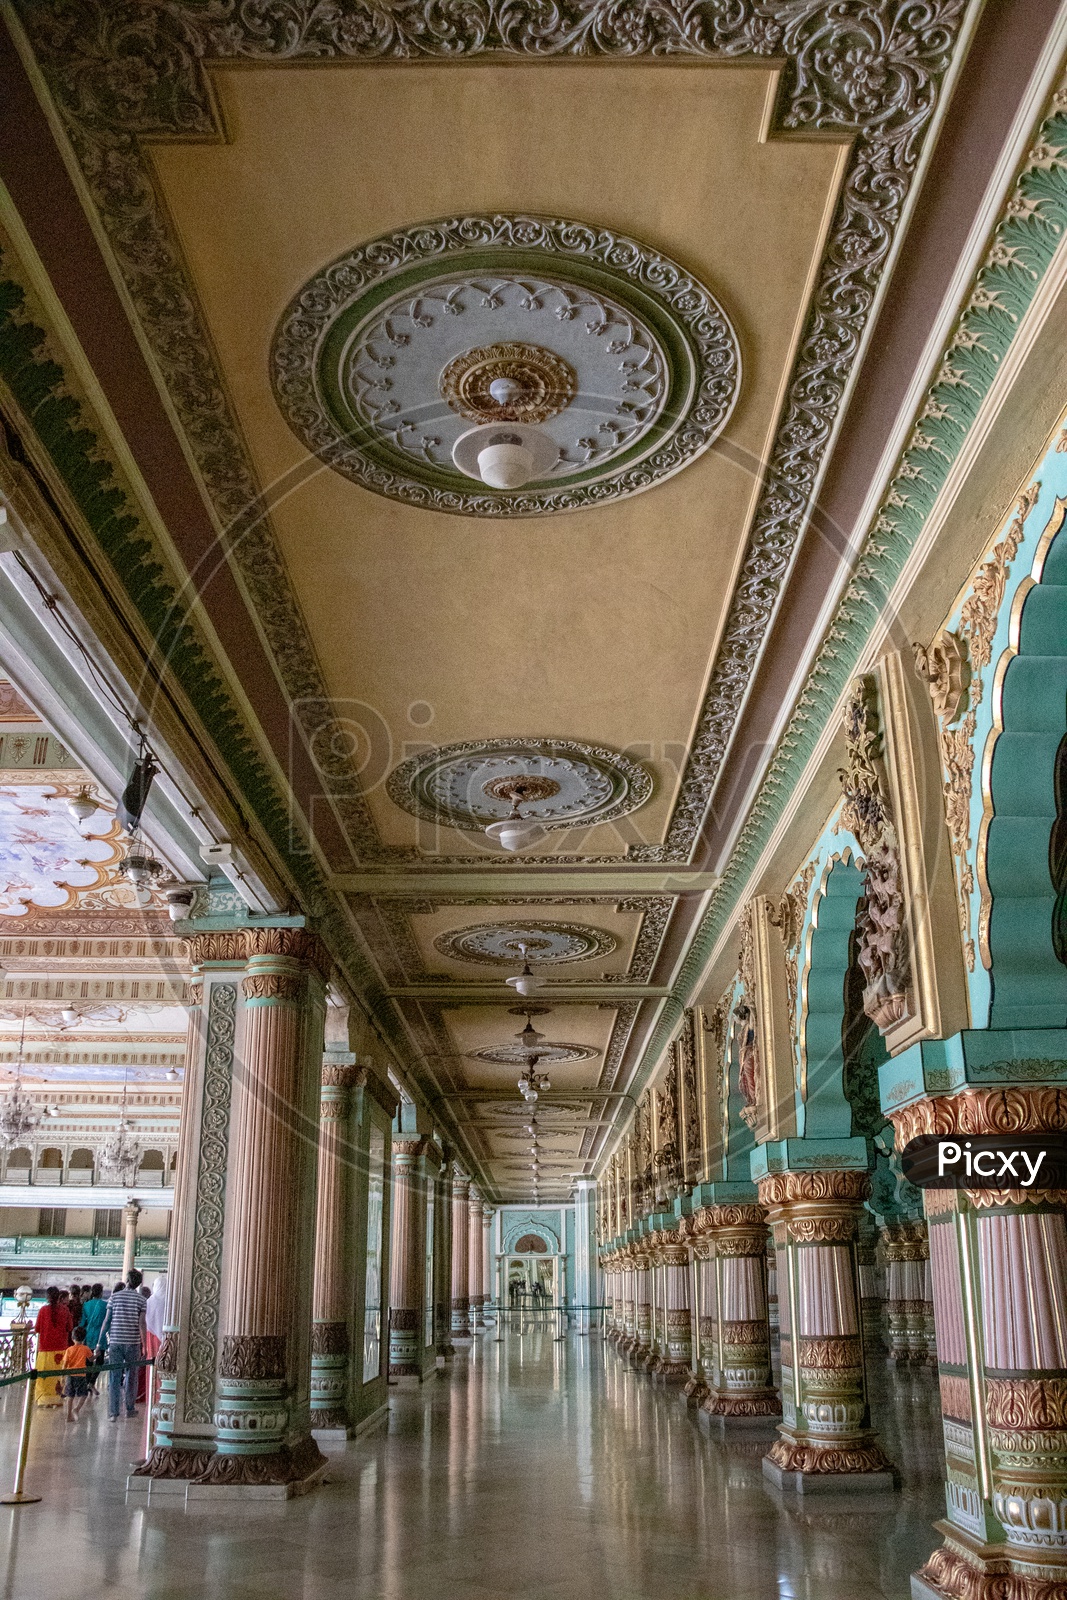 Architecture Of Mysore Palace With Designs On Pillars And Corridor